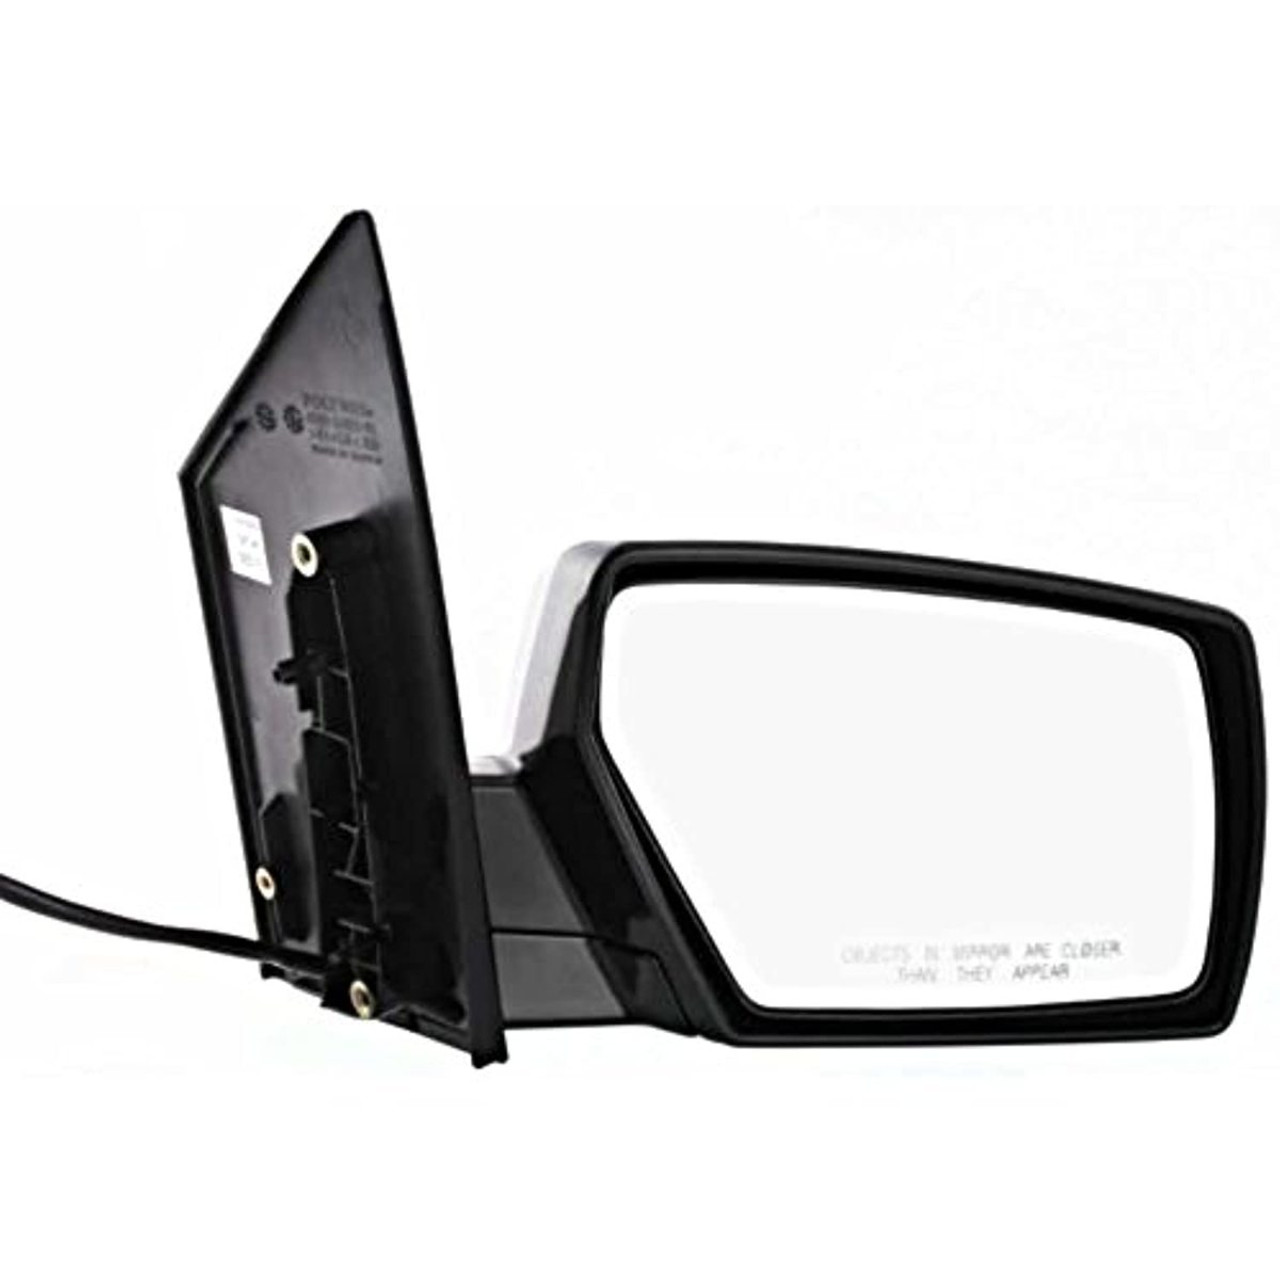 Fits 04-09 Quest Right Pass Power Mirror No Heat, Memory Or Puddle Lamp